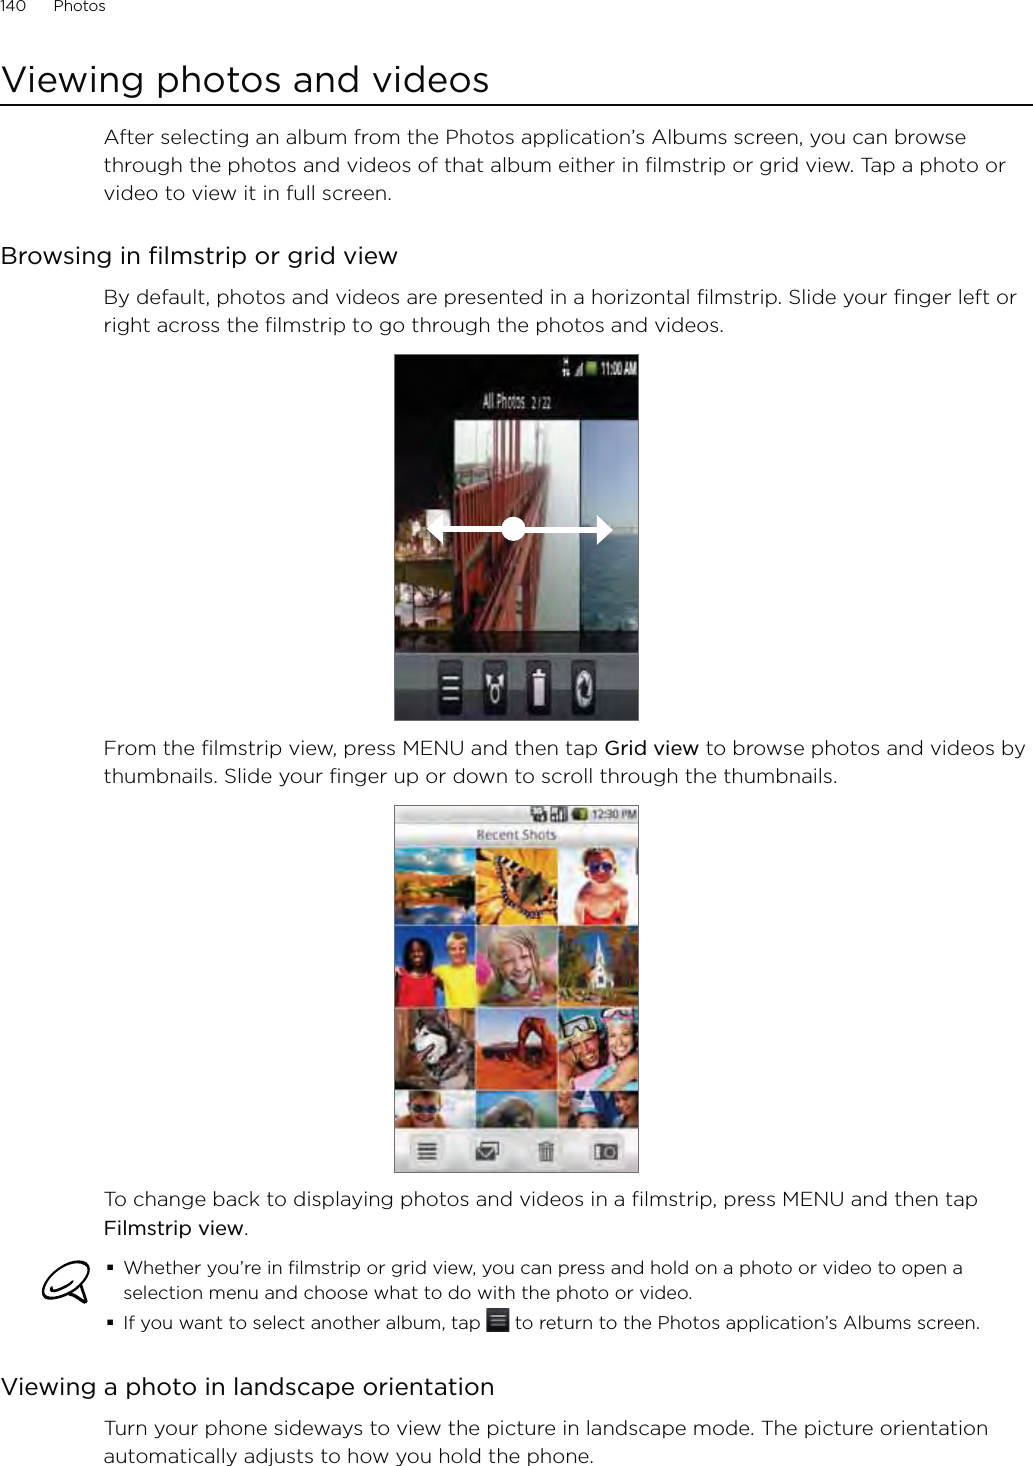 140      Photos      Viewing photos and videosAfter selecting an album from the Photos application’s Albums screen, you can browse through the photos and videos of that album either in filmstrip or grid view. Tap a photo or video to view it in full screen.Browsing in filmstrip or grid viewBy default, photos and videos are presented in a horizontal filmstrip. Slide your finger left or right across the filmstrip to go through the photos and videos.From the filmstrip view, press MENU and then tap Grid view to browse photos and videos by thumbnails. Slide your finger up or down to scroll through the thumbnails.To change back to displaying photos and videos in a filmstrip, press MENU and then tap Filmstrip view.Whether you’re in filmstrip or grid view, you can press and hold on a photo or video to open a selection menu and choose what to do with the photo or video.If you want to select another album, tap   to return to the Photos application’s Albums screen.Viewing a photo in landscape orientationTurn your phone sideways to view the picture in landscape mode. The picture orientation automatically adjusts to how you hold the phone.